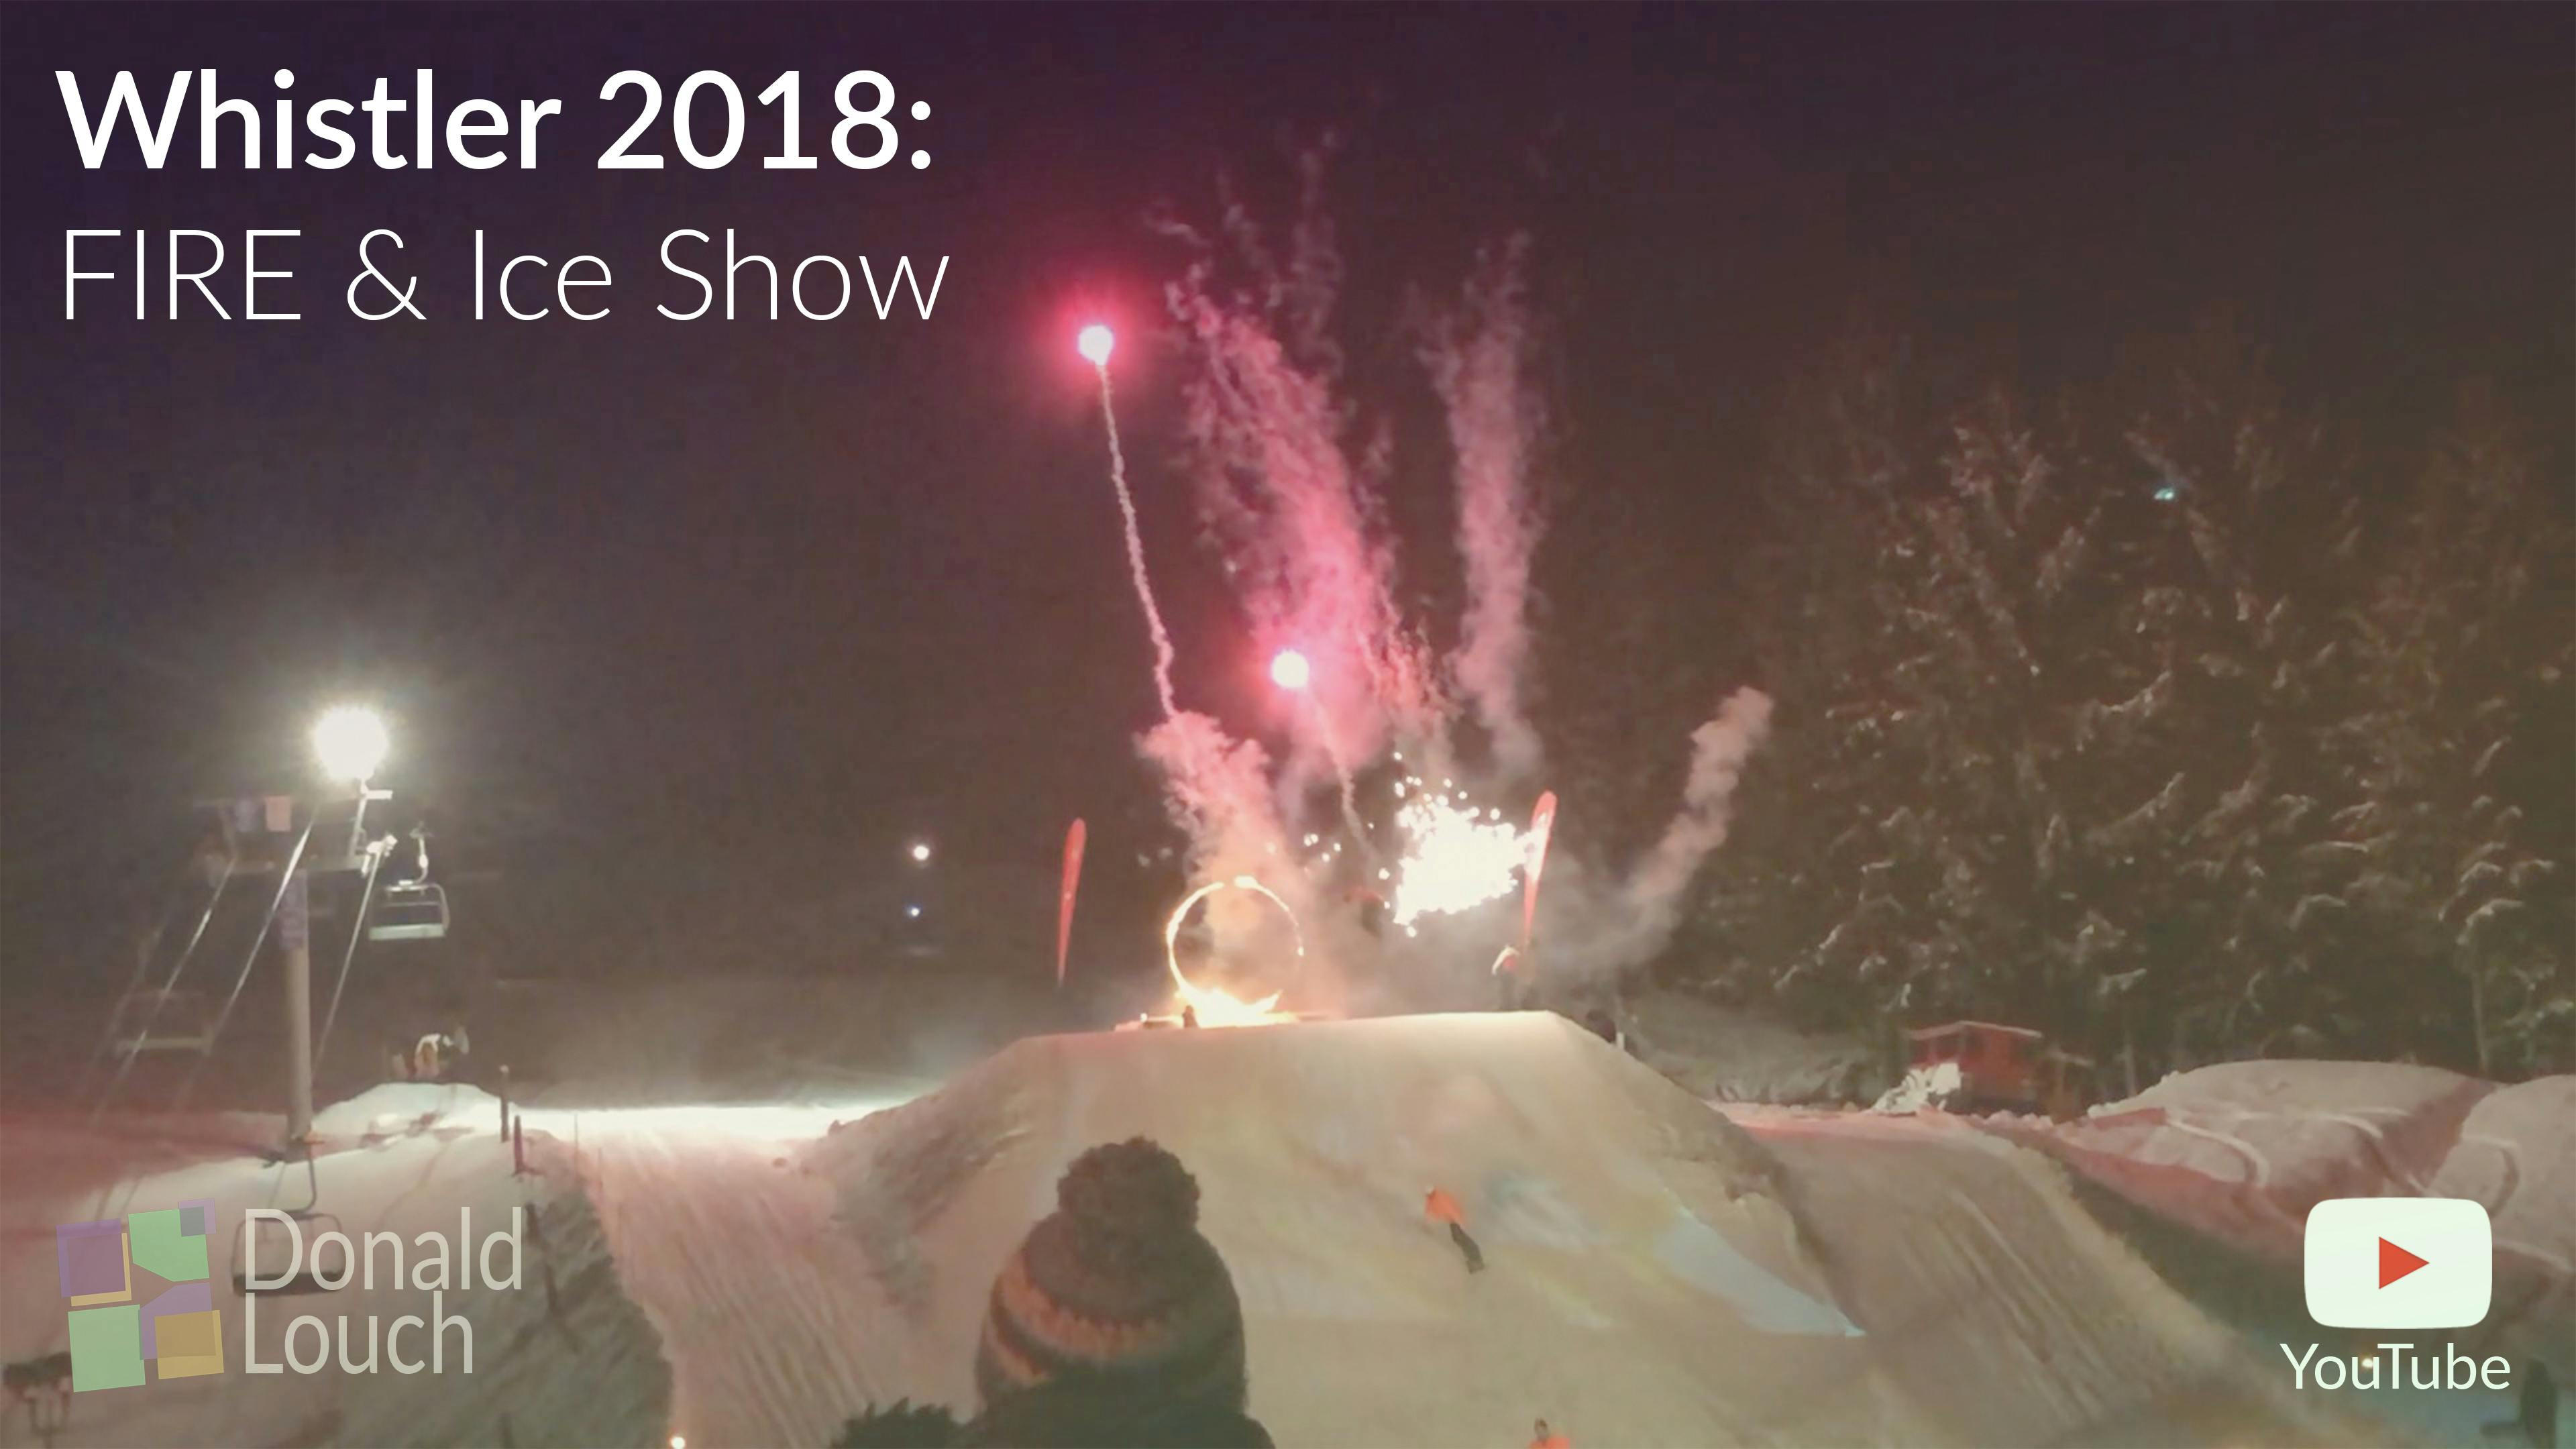 Fire & Ice Show | Whistler 2018